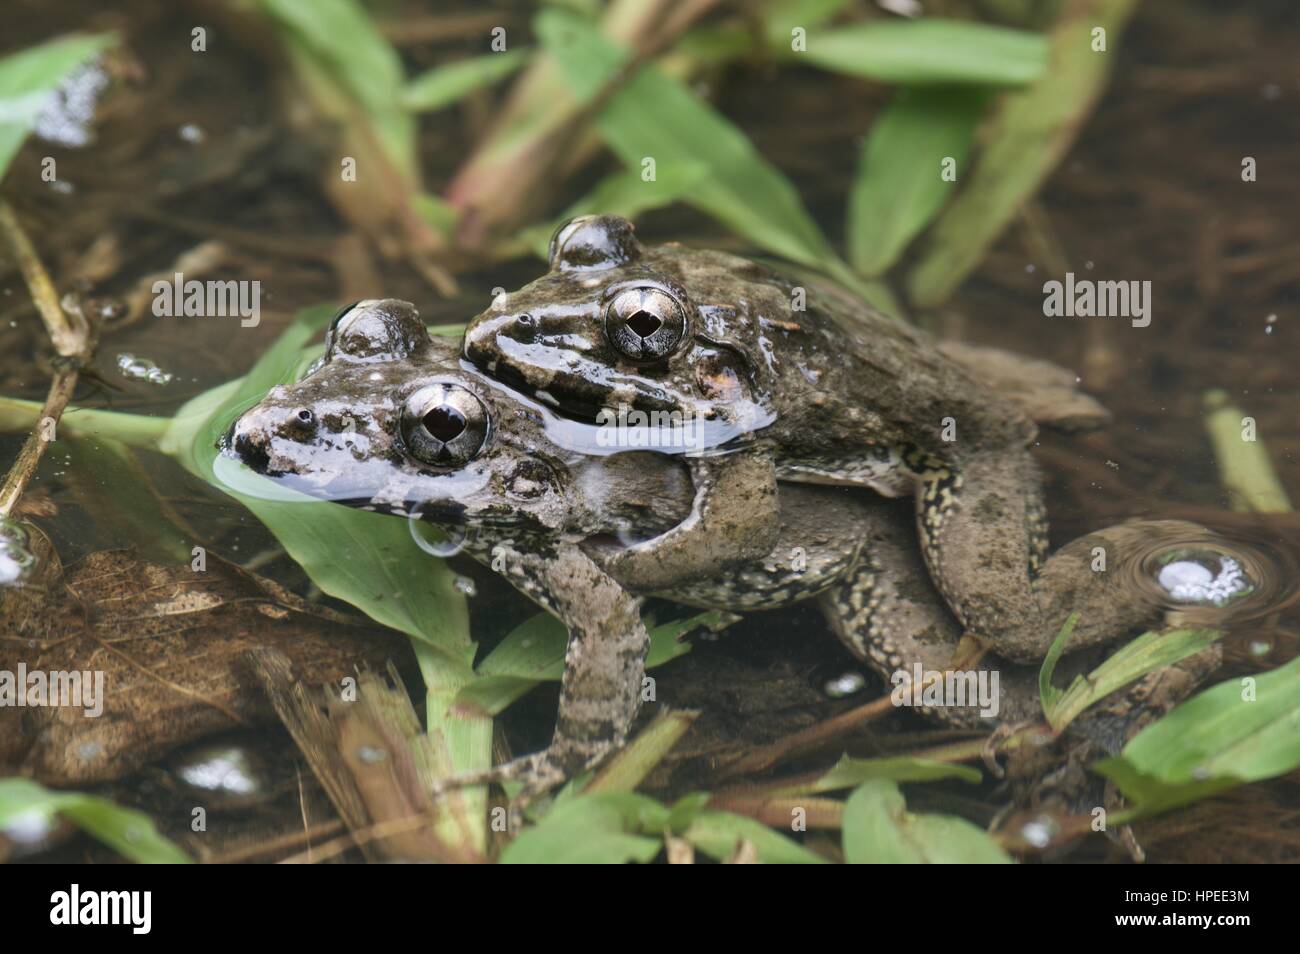 A mating pair of Lesser Swamp Frogs (Limnonectes paramacrodon) in a shallow pond at Bako National Park, Sarawak, East Malaysia, Borneo Stock Photo